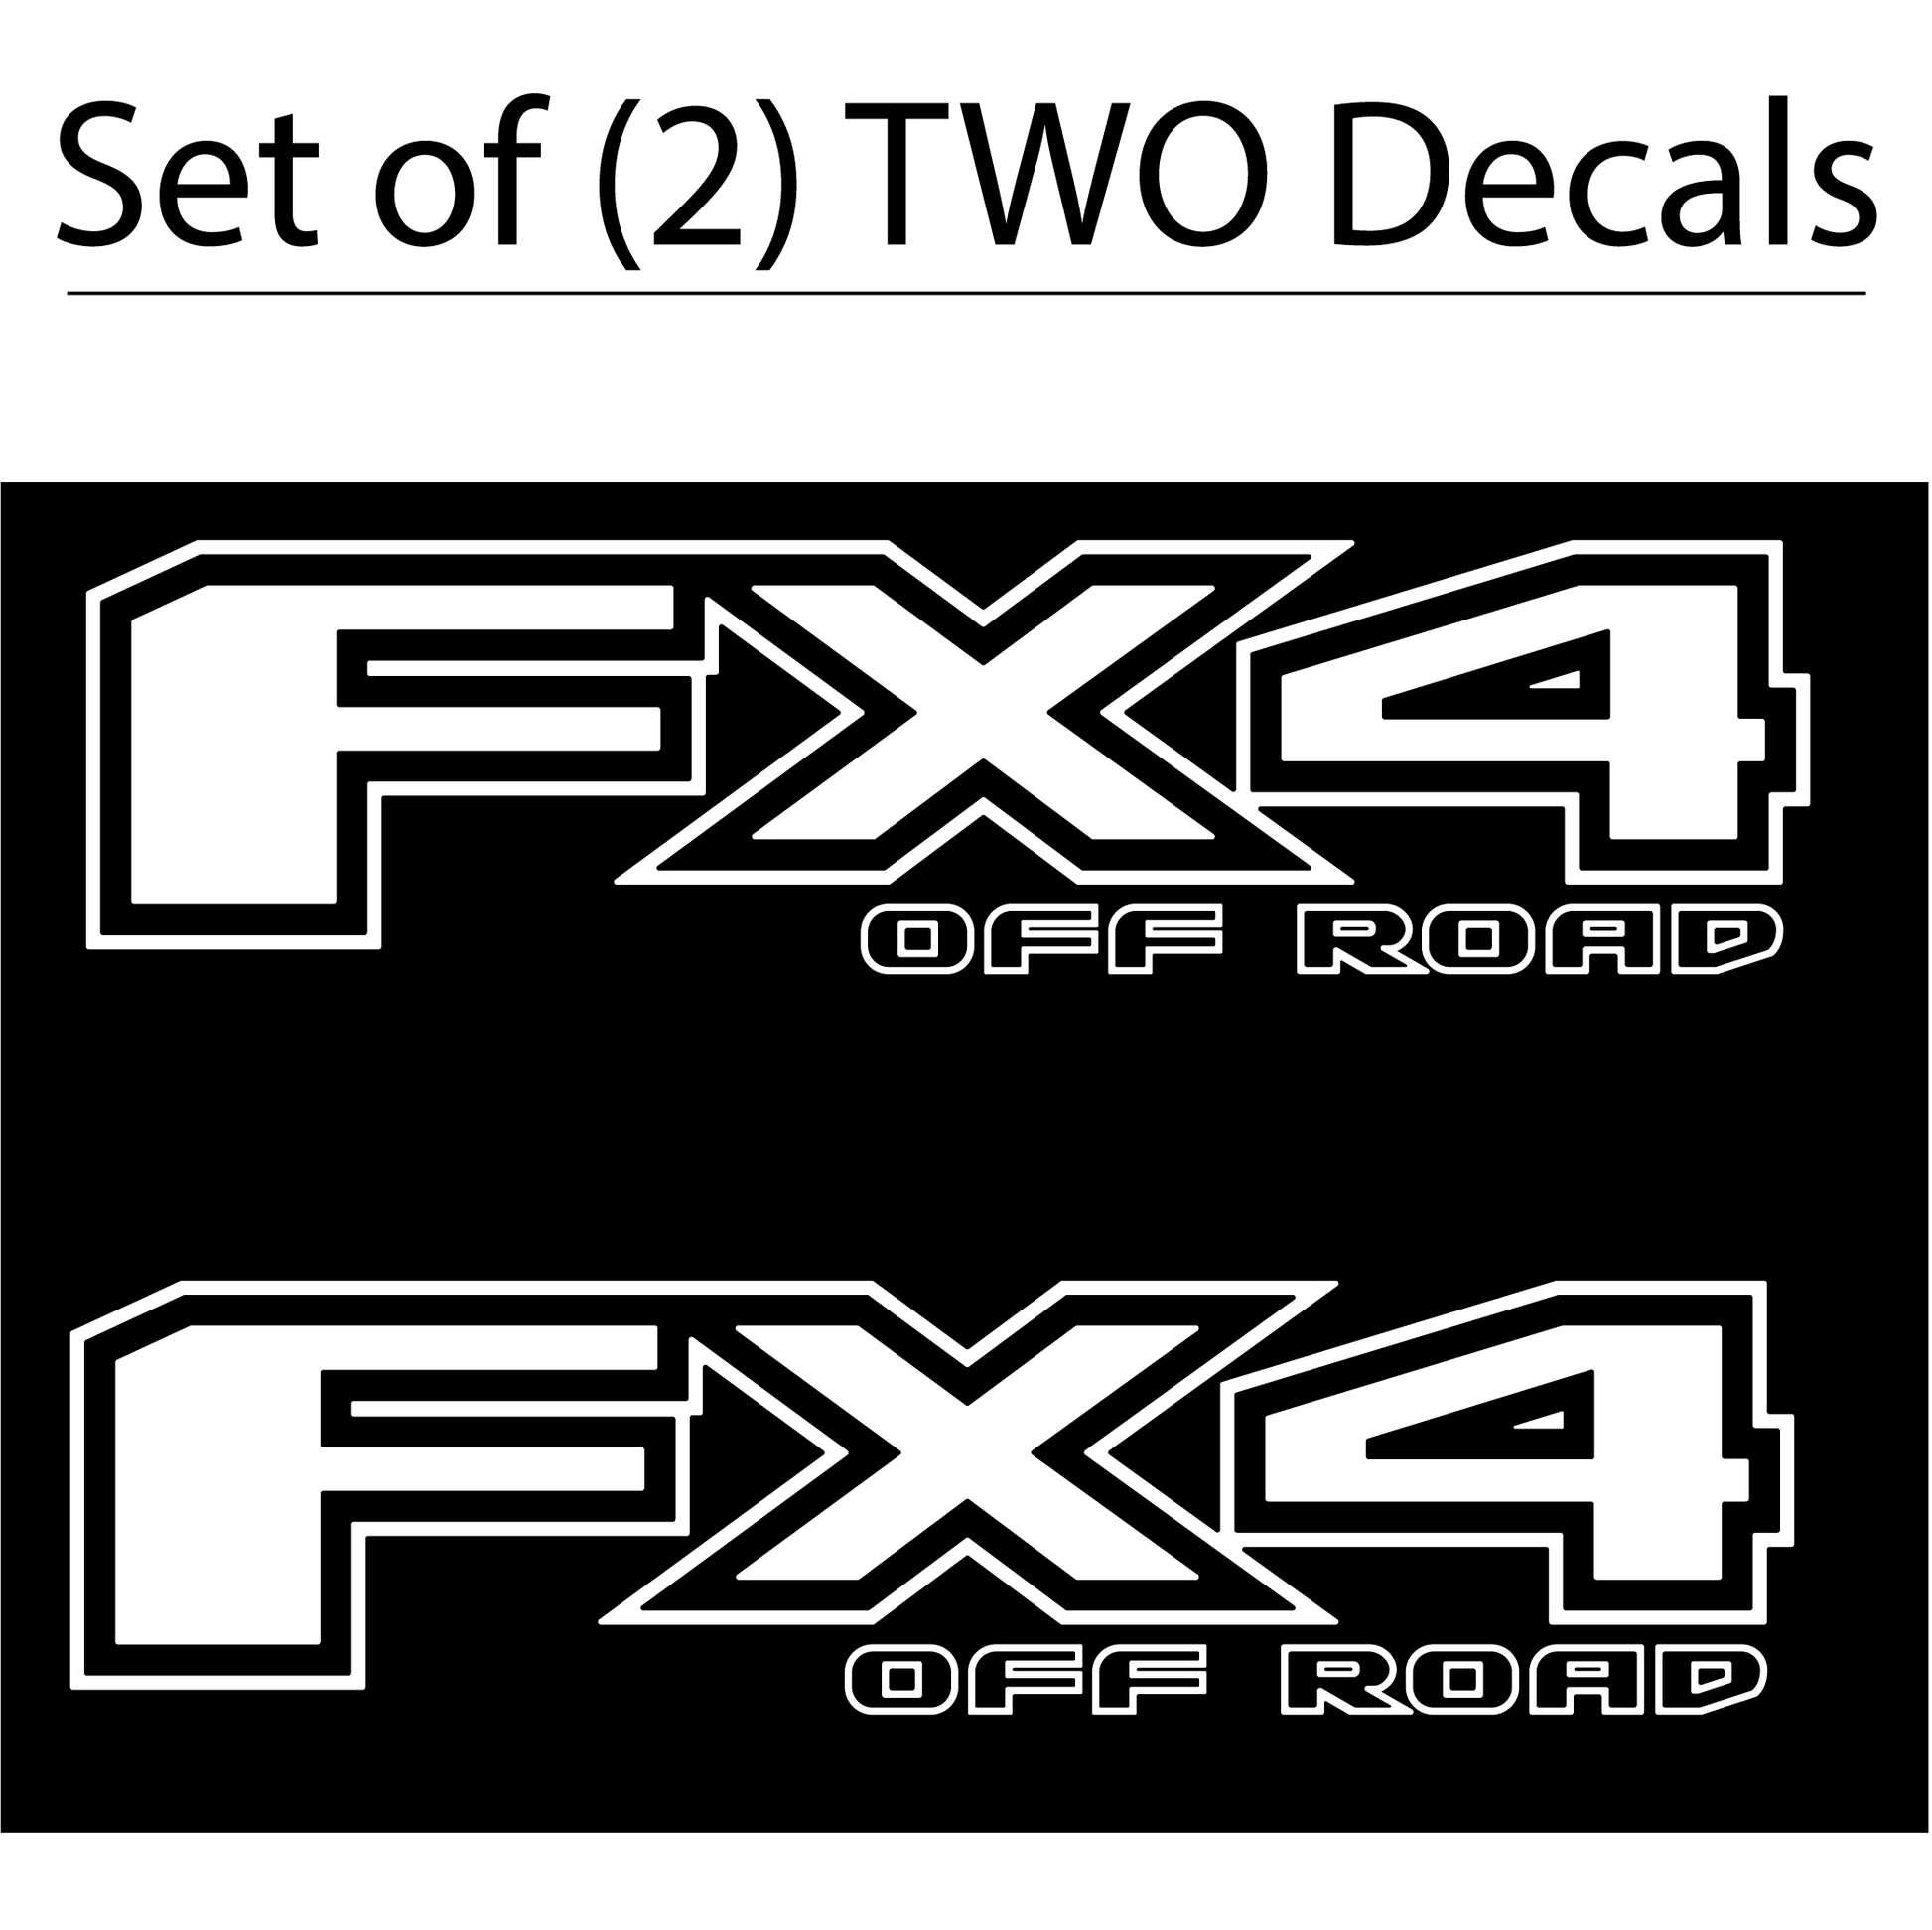 Shop Vinyl Design F-150 F-250 FX4 Off Road Replacement Bedside Decals Vehicle Vinyl Graphic Decal White Gloss Shop Vinyl Design decals stickers